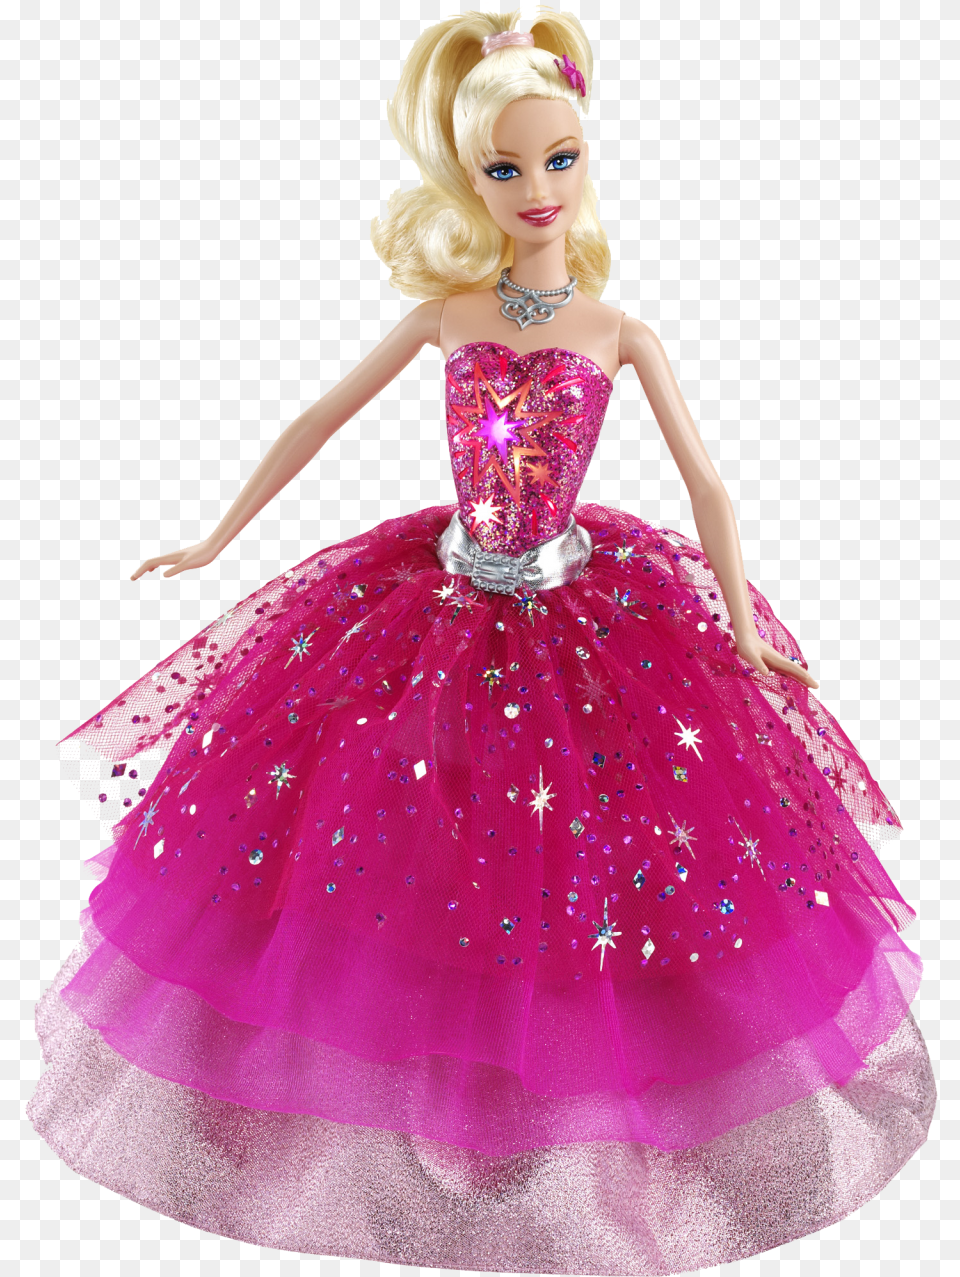 Barbie Doll Image Clipart Barbie Doll, Toy, Figurine, Dress, Clothing Free Transparent Png